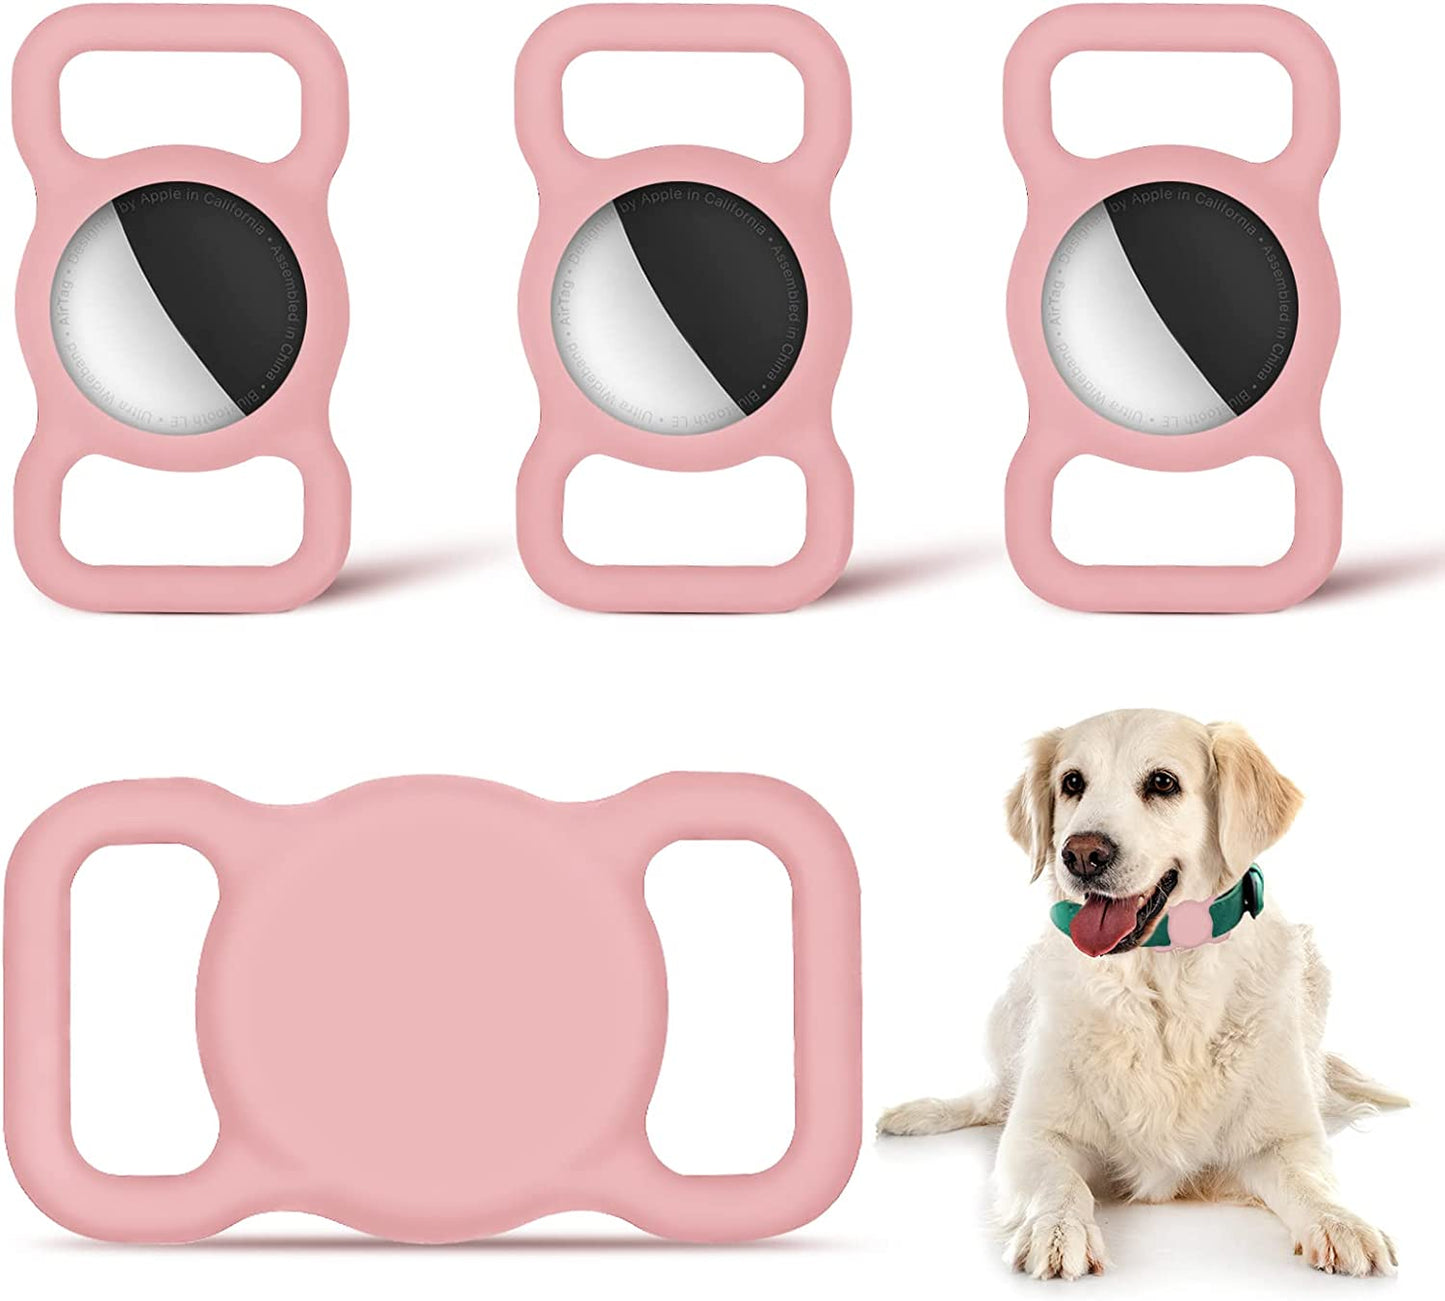 Case for Airtag Dog Collar Holder, Airtag Holder Silicone Non-Shake Protective Cover for Dog Cat Pet Loop Collar, School Bag Strap Band, Compatible with Apple Airtag Case for Dog Collar (Blue-2Pack) Electronics > GPS Accessories > GPS Cases D DOMISOL Pink 4 pack 